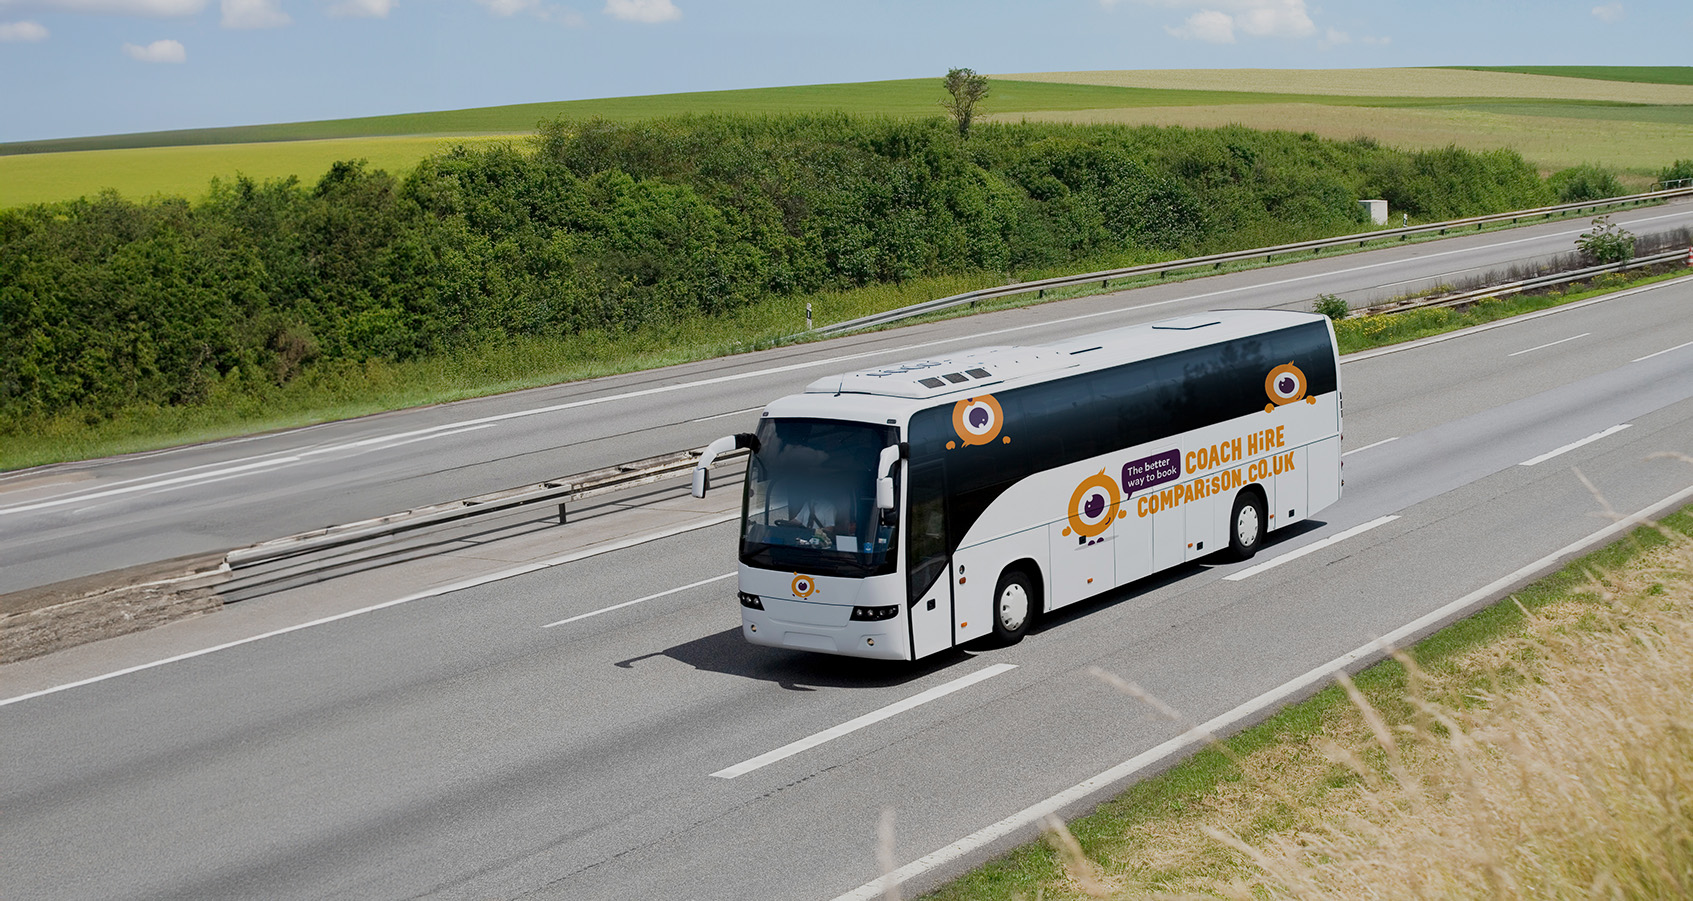 Coach Hire Manchester: Let the Reviews Speak for Themselves